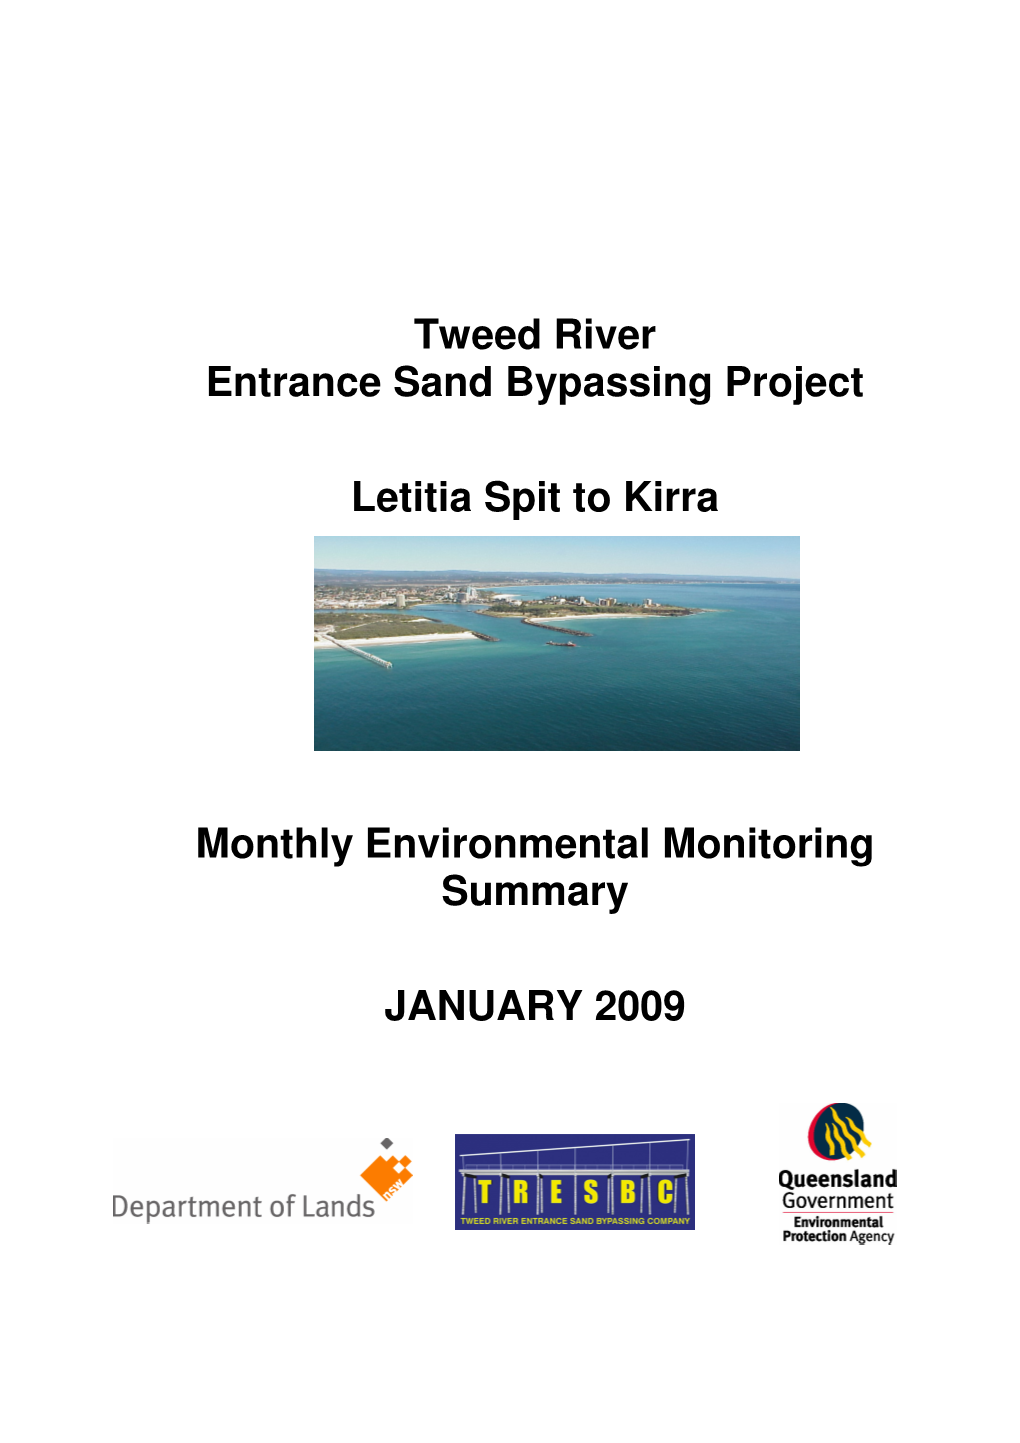 Monthly Environmental Monitoring Summary for January 2009